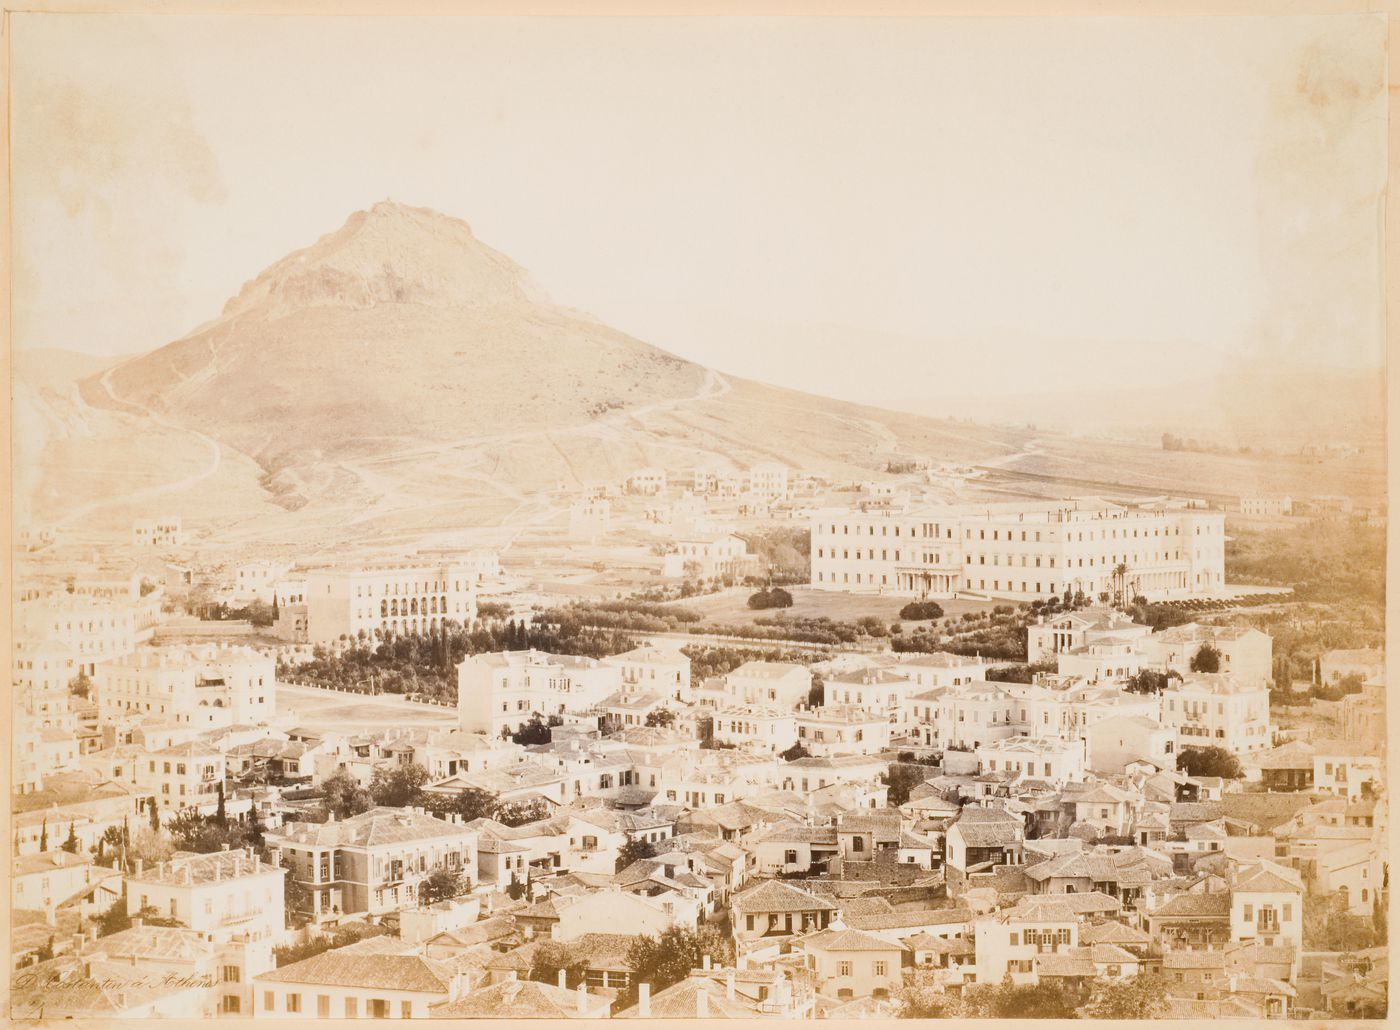 Panoramic view of the area around Palace Square (now Syntagma [Constitution] Square) showing Lykavittos (also known as Lycabettus) Hill, the Royal Palace (also known as the Old Palace; now the Parliament), the Demetriou House, and the Plaka, Athens, Greece